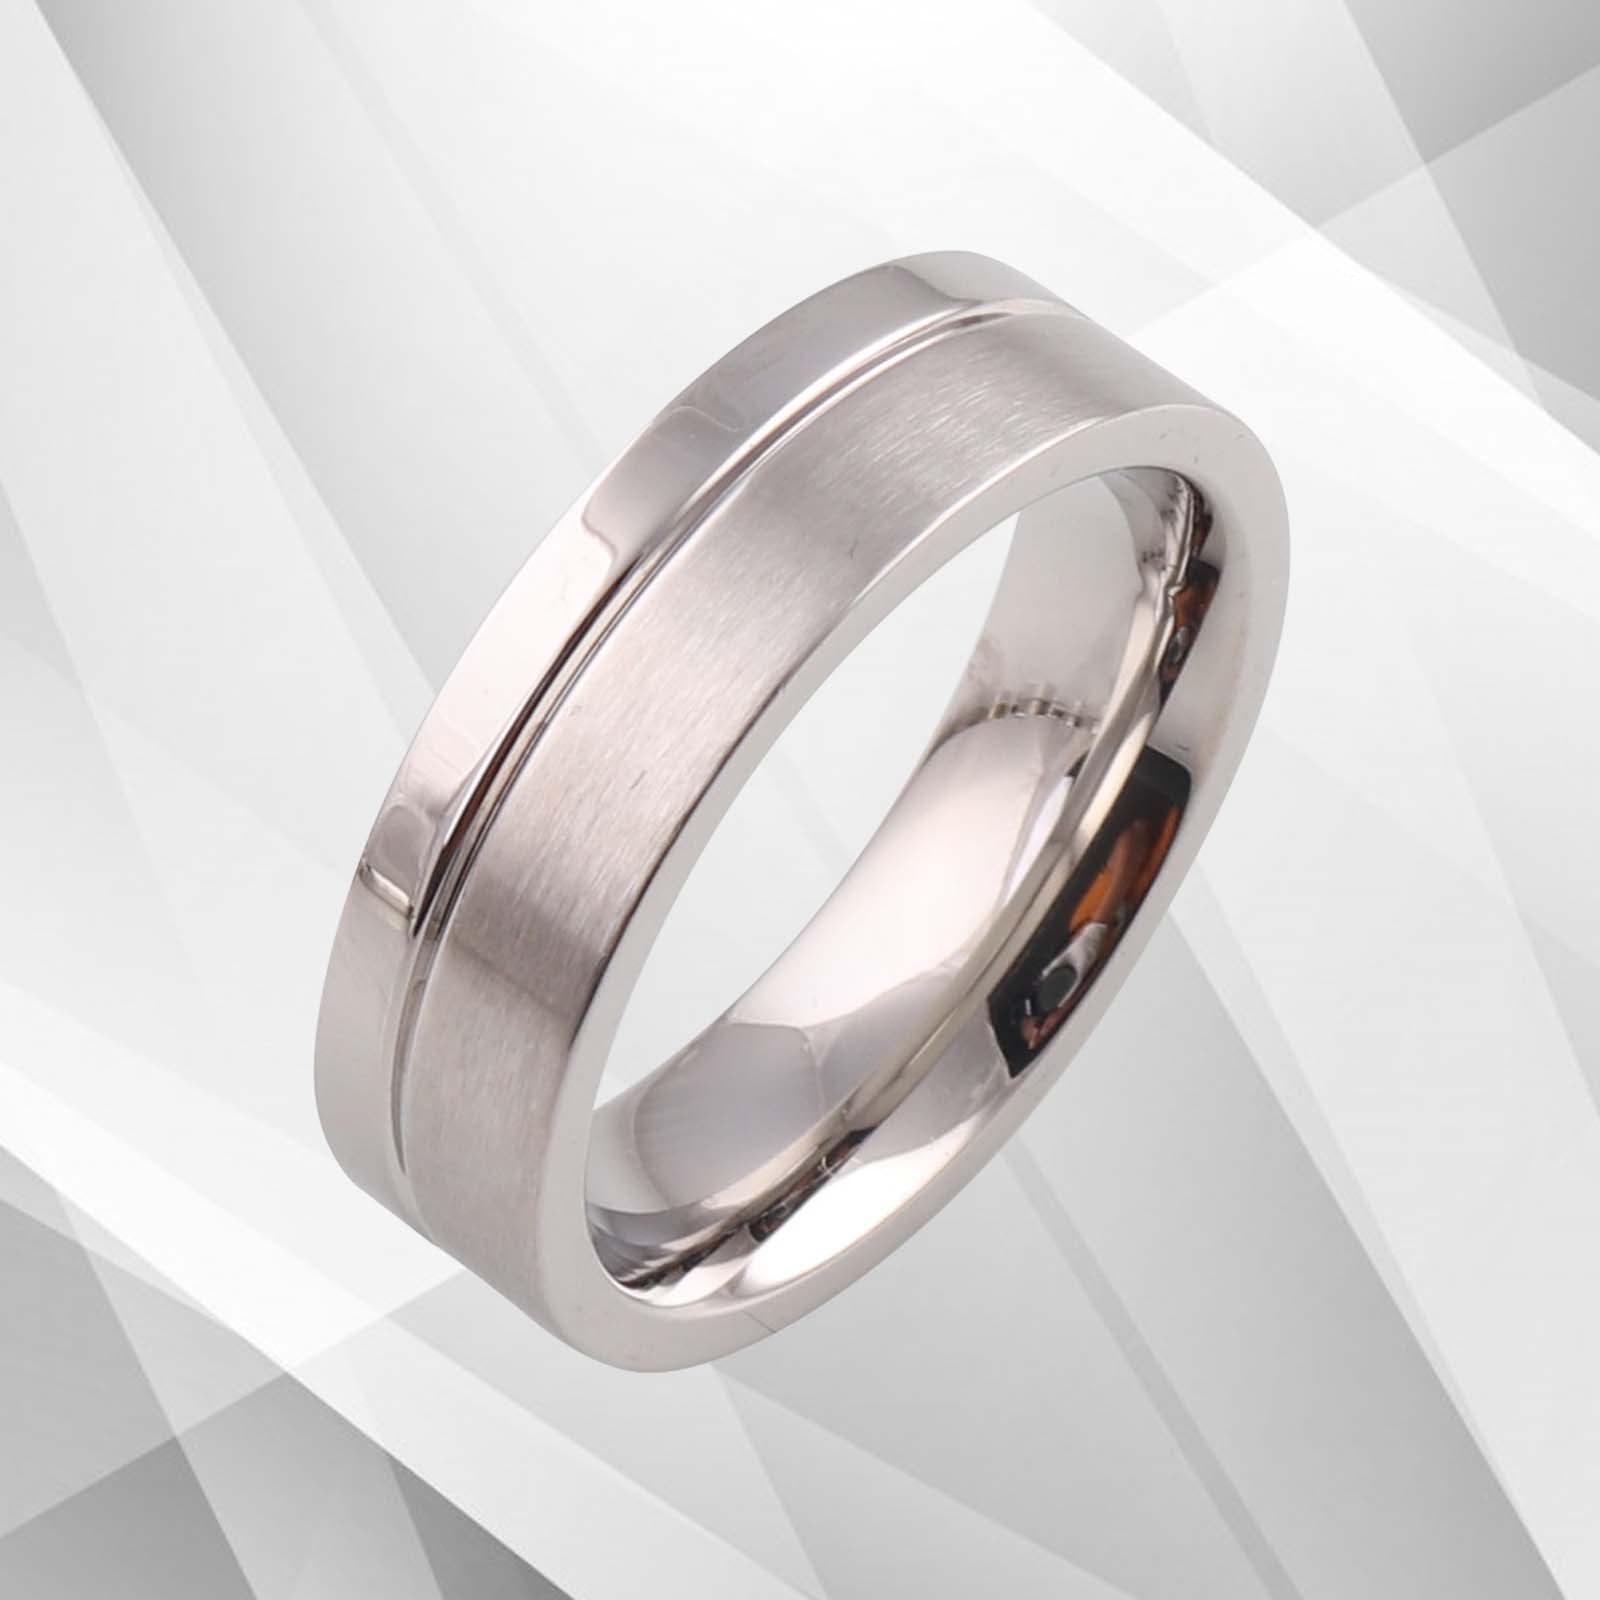 6mm Tungsten Carbide Wedding Band with White Gold Finish - Comfort Fit, Men's Engagement Ring Bijou Her